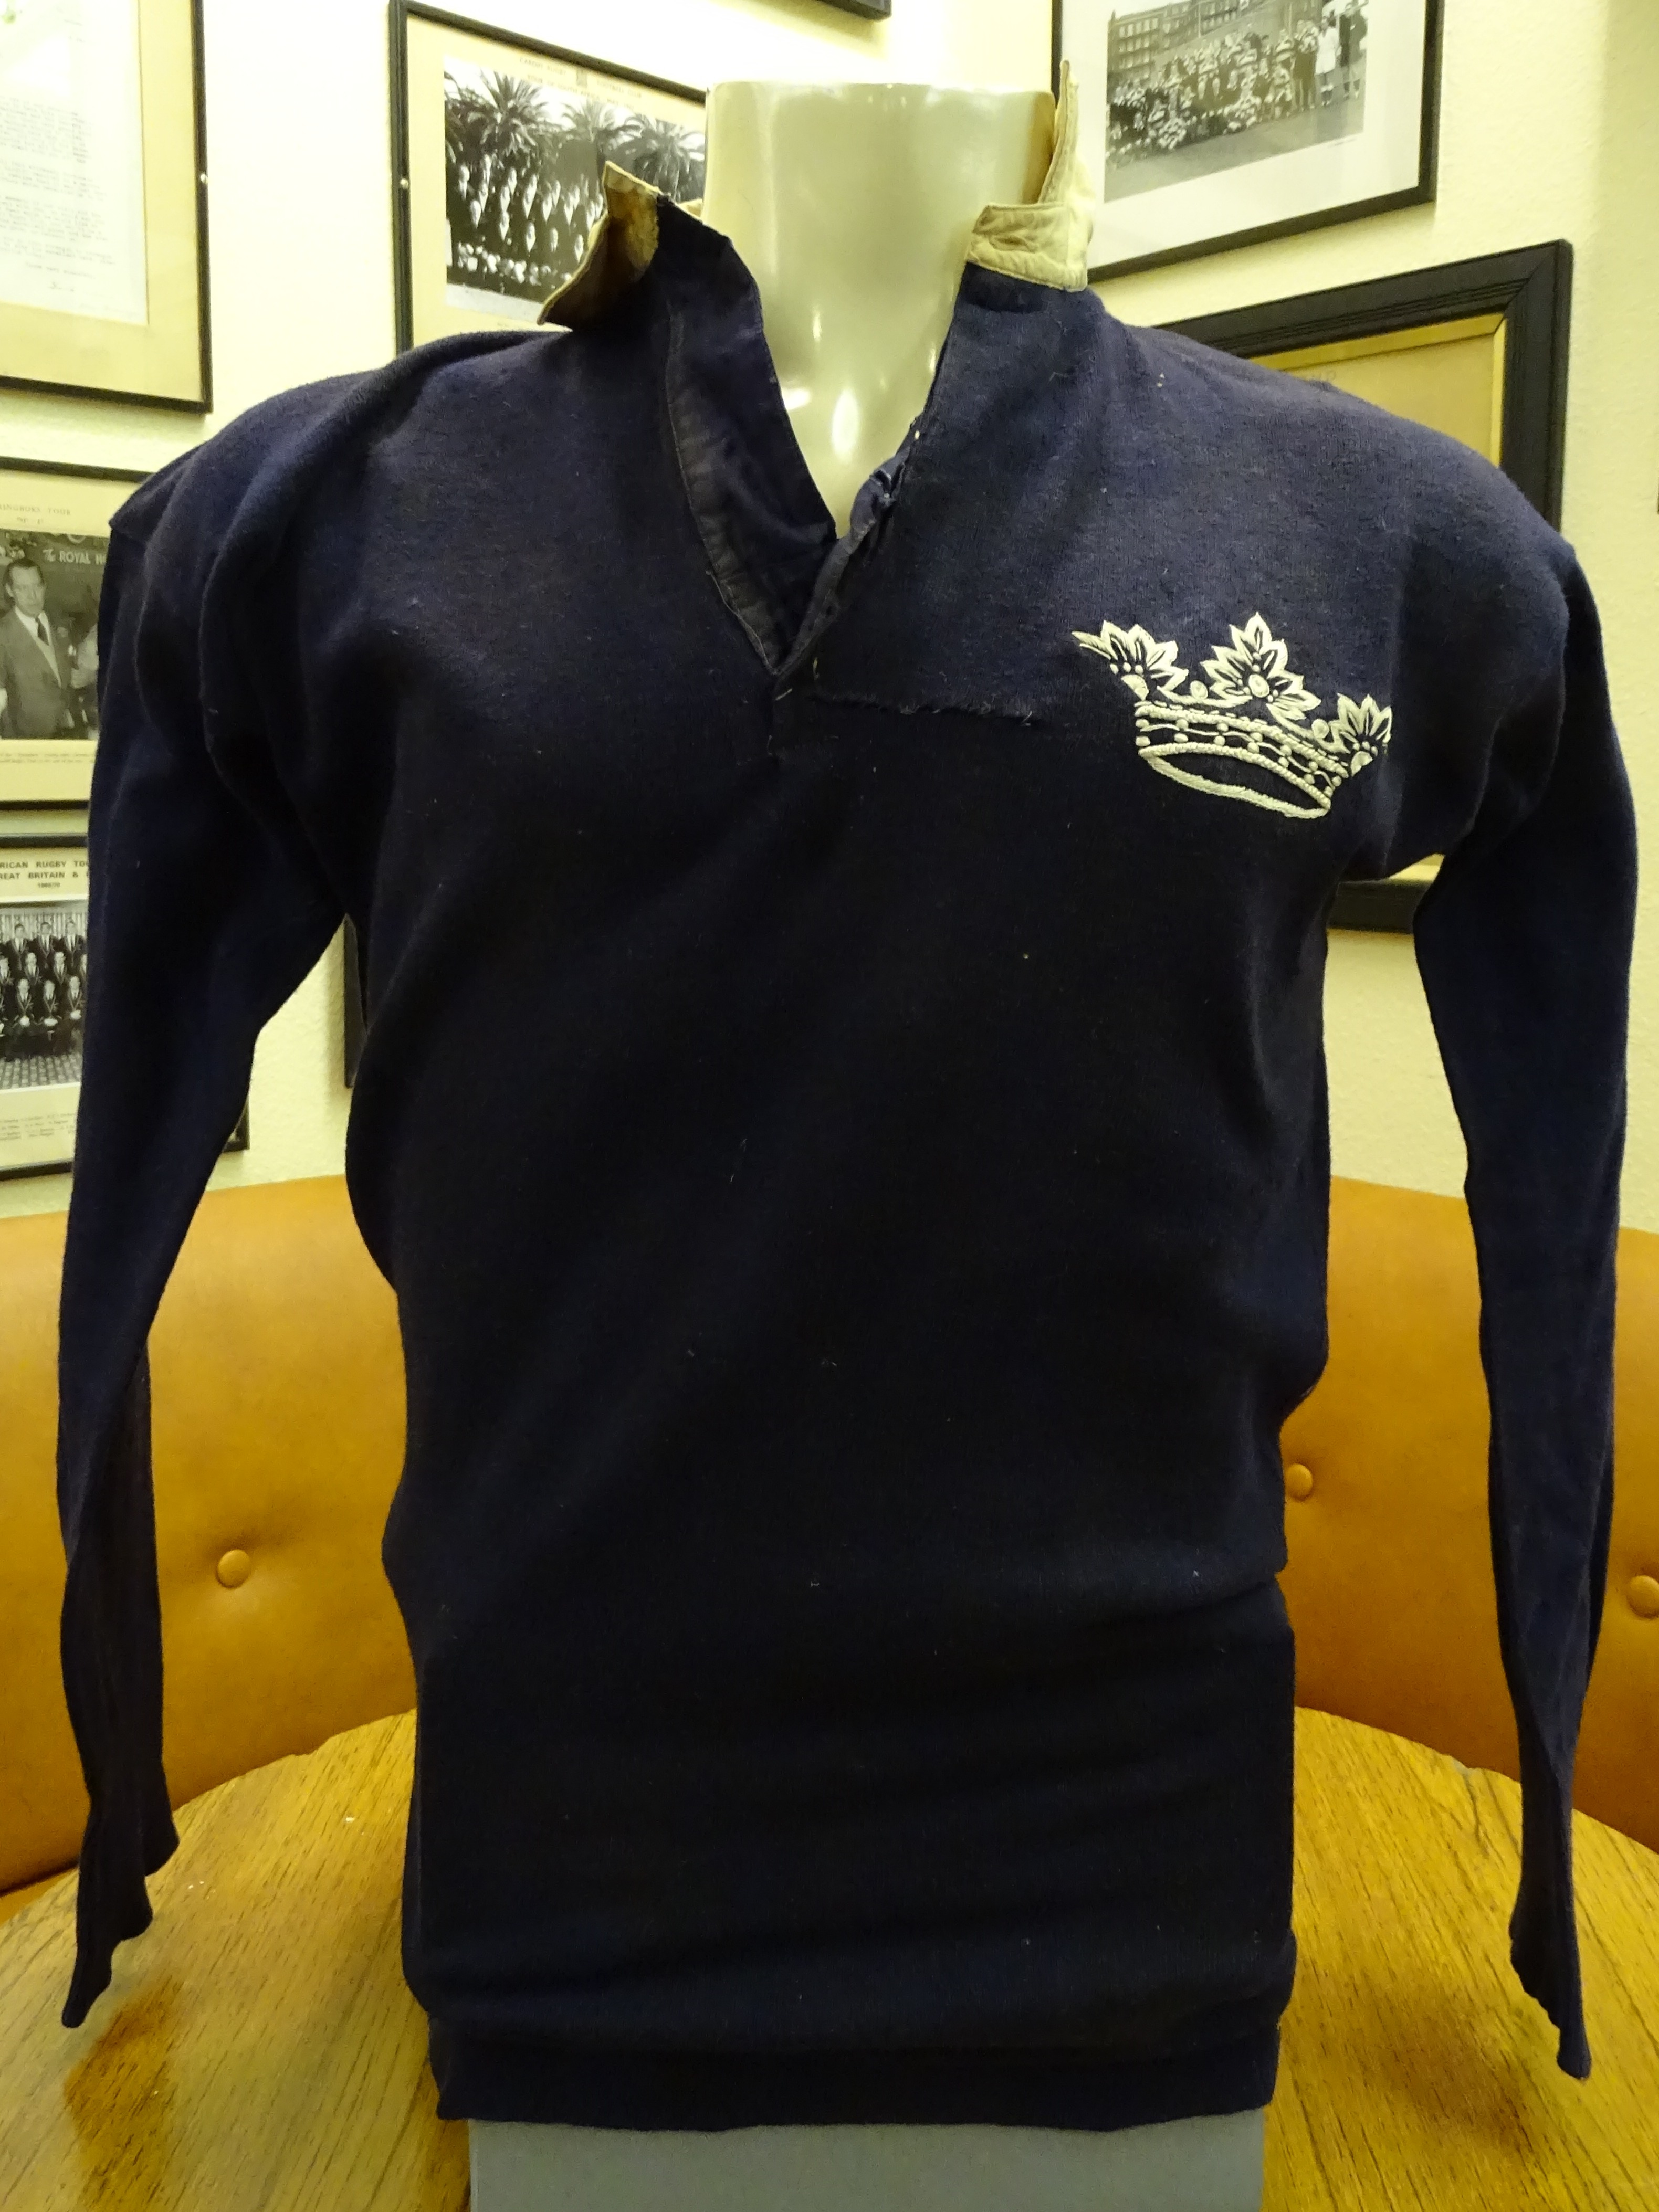 Jersey - Oxford University | Cardiff Rugby Museum